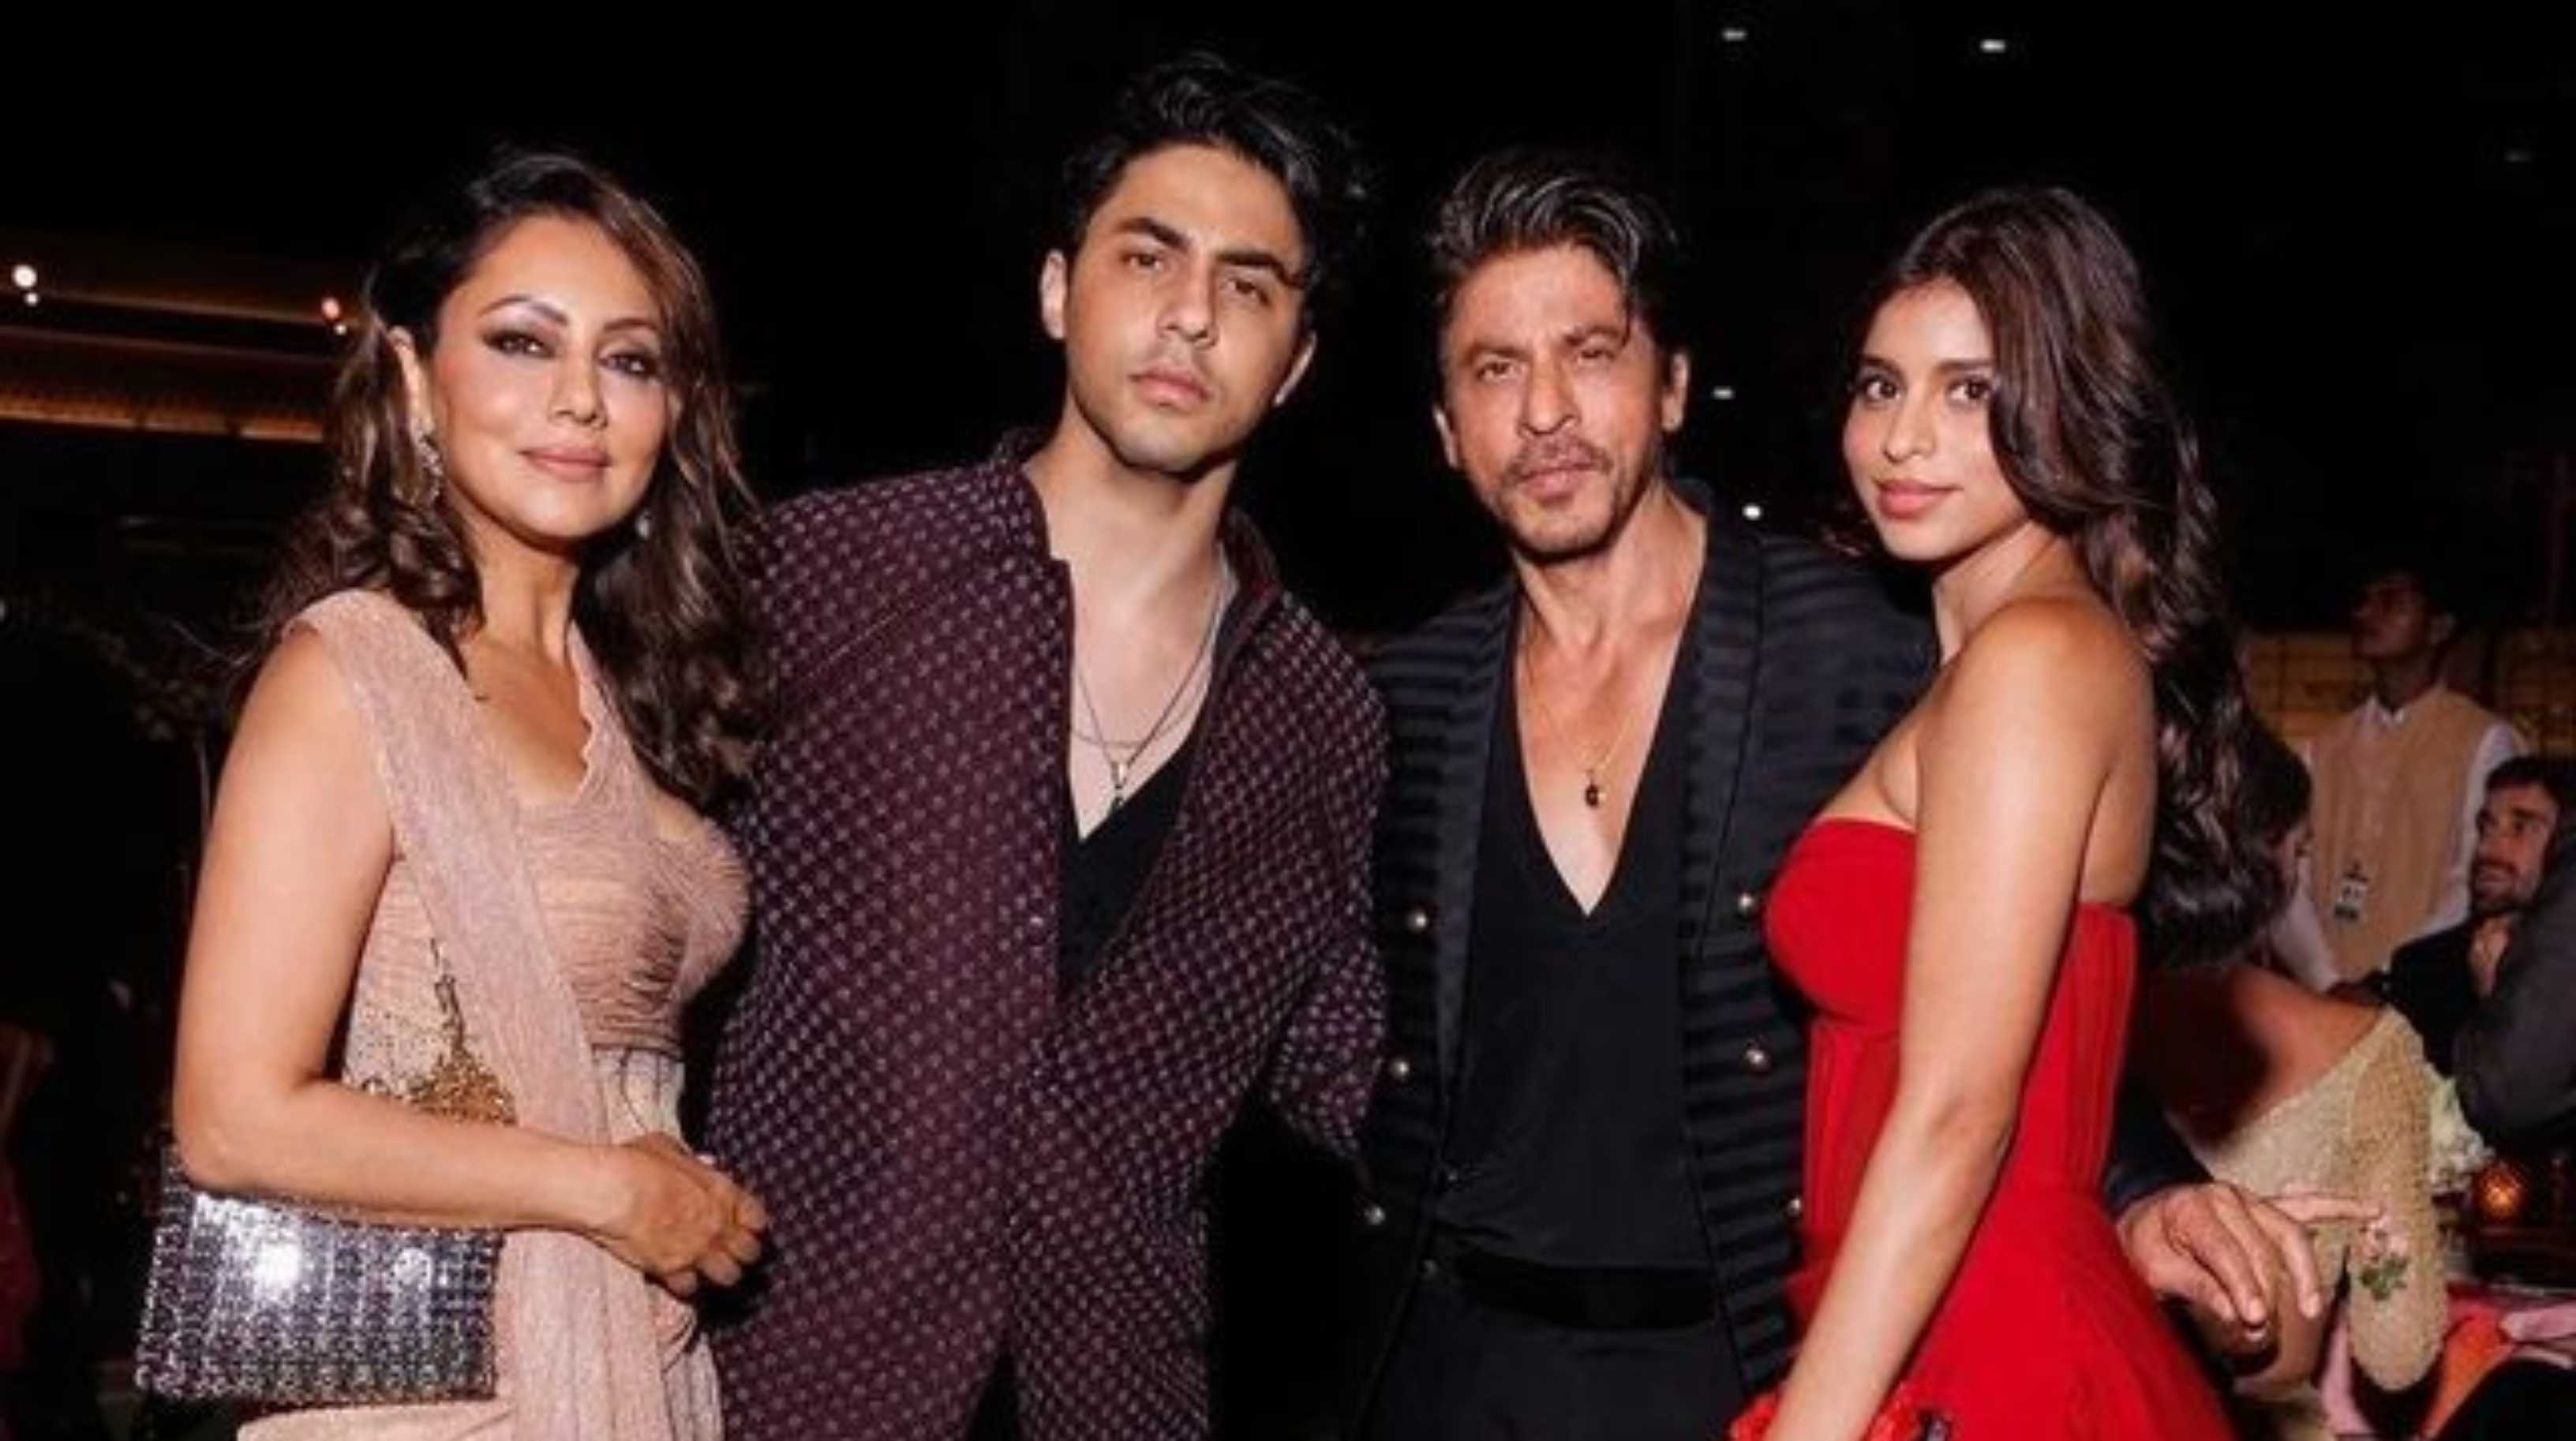 Shah Rukh Khan and Aryan Khan look like handsome twins in viral family photo from Ambani’s event